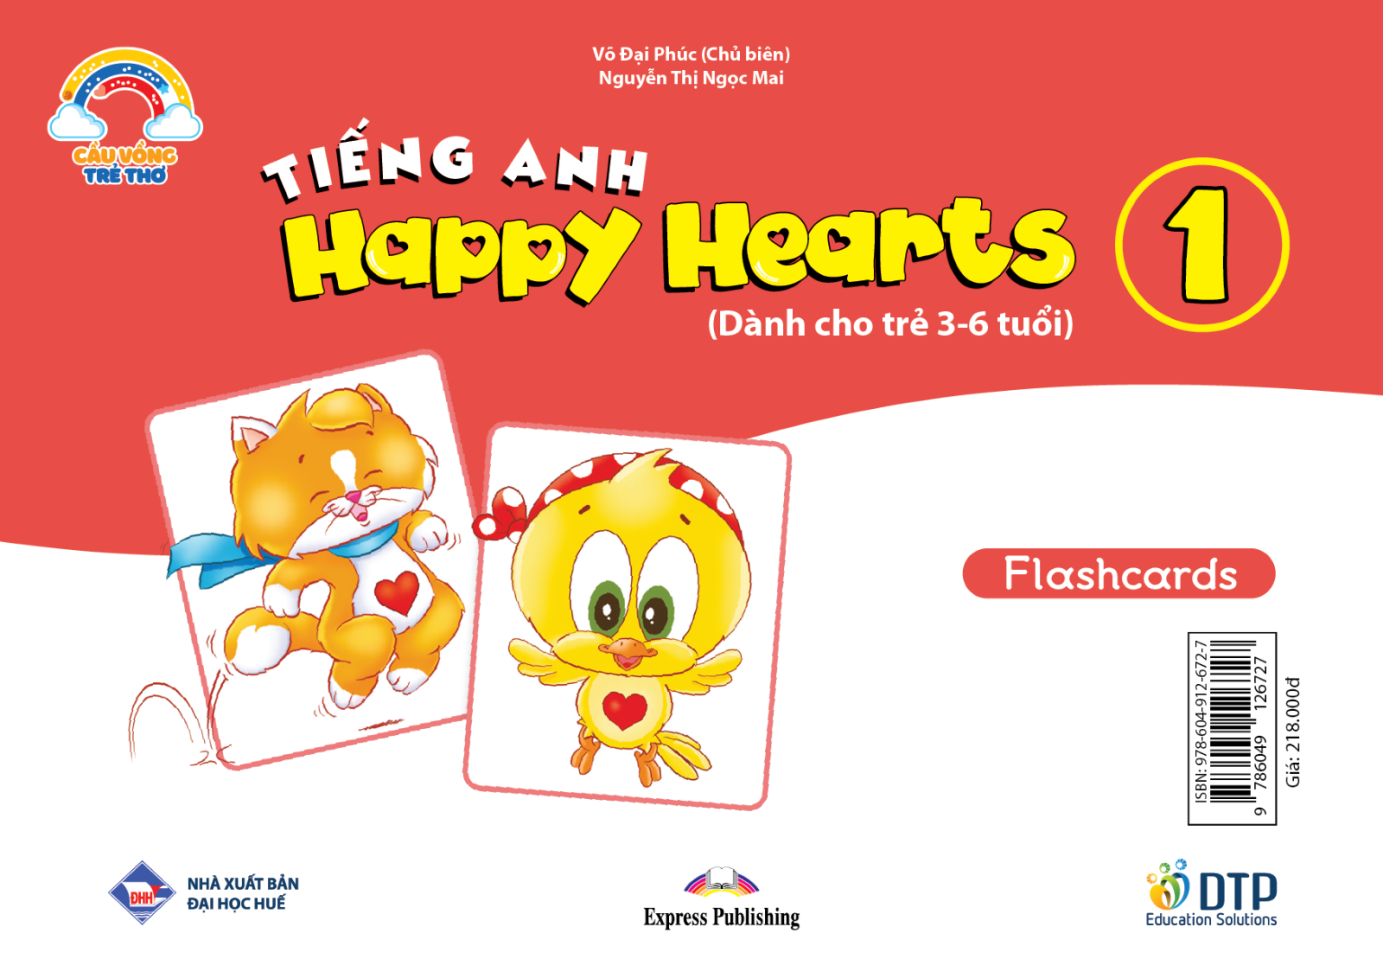 Tiếng Anh Happy Hearts 1 - Flashcards